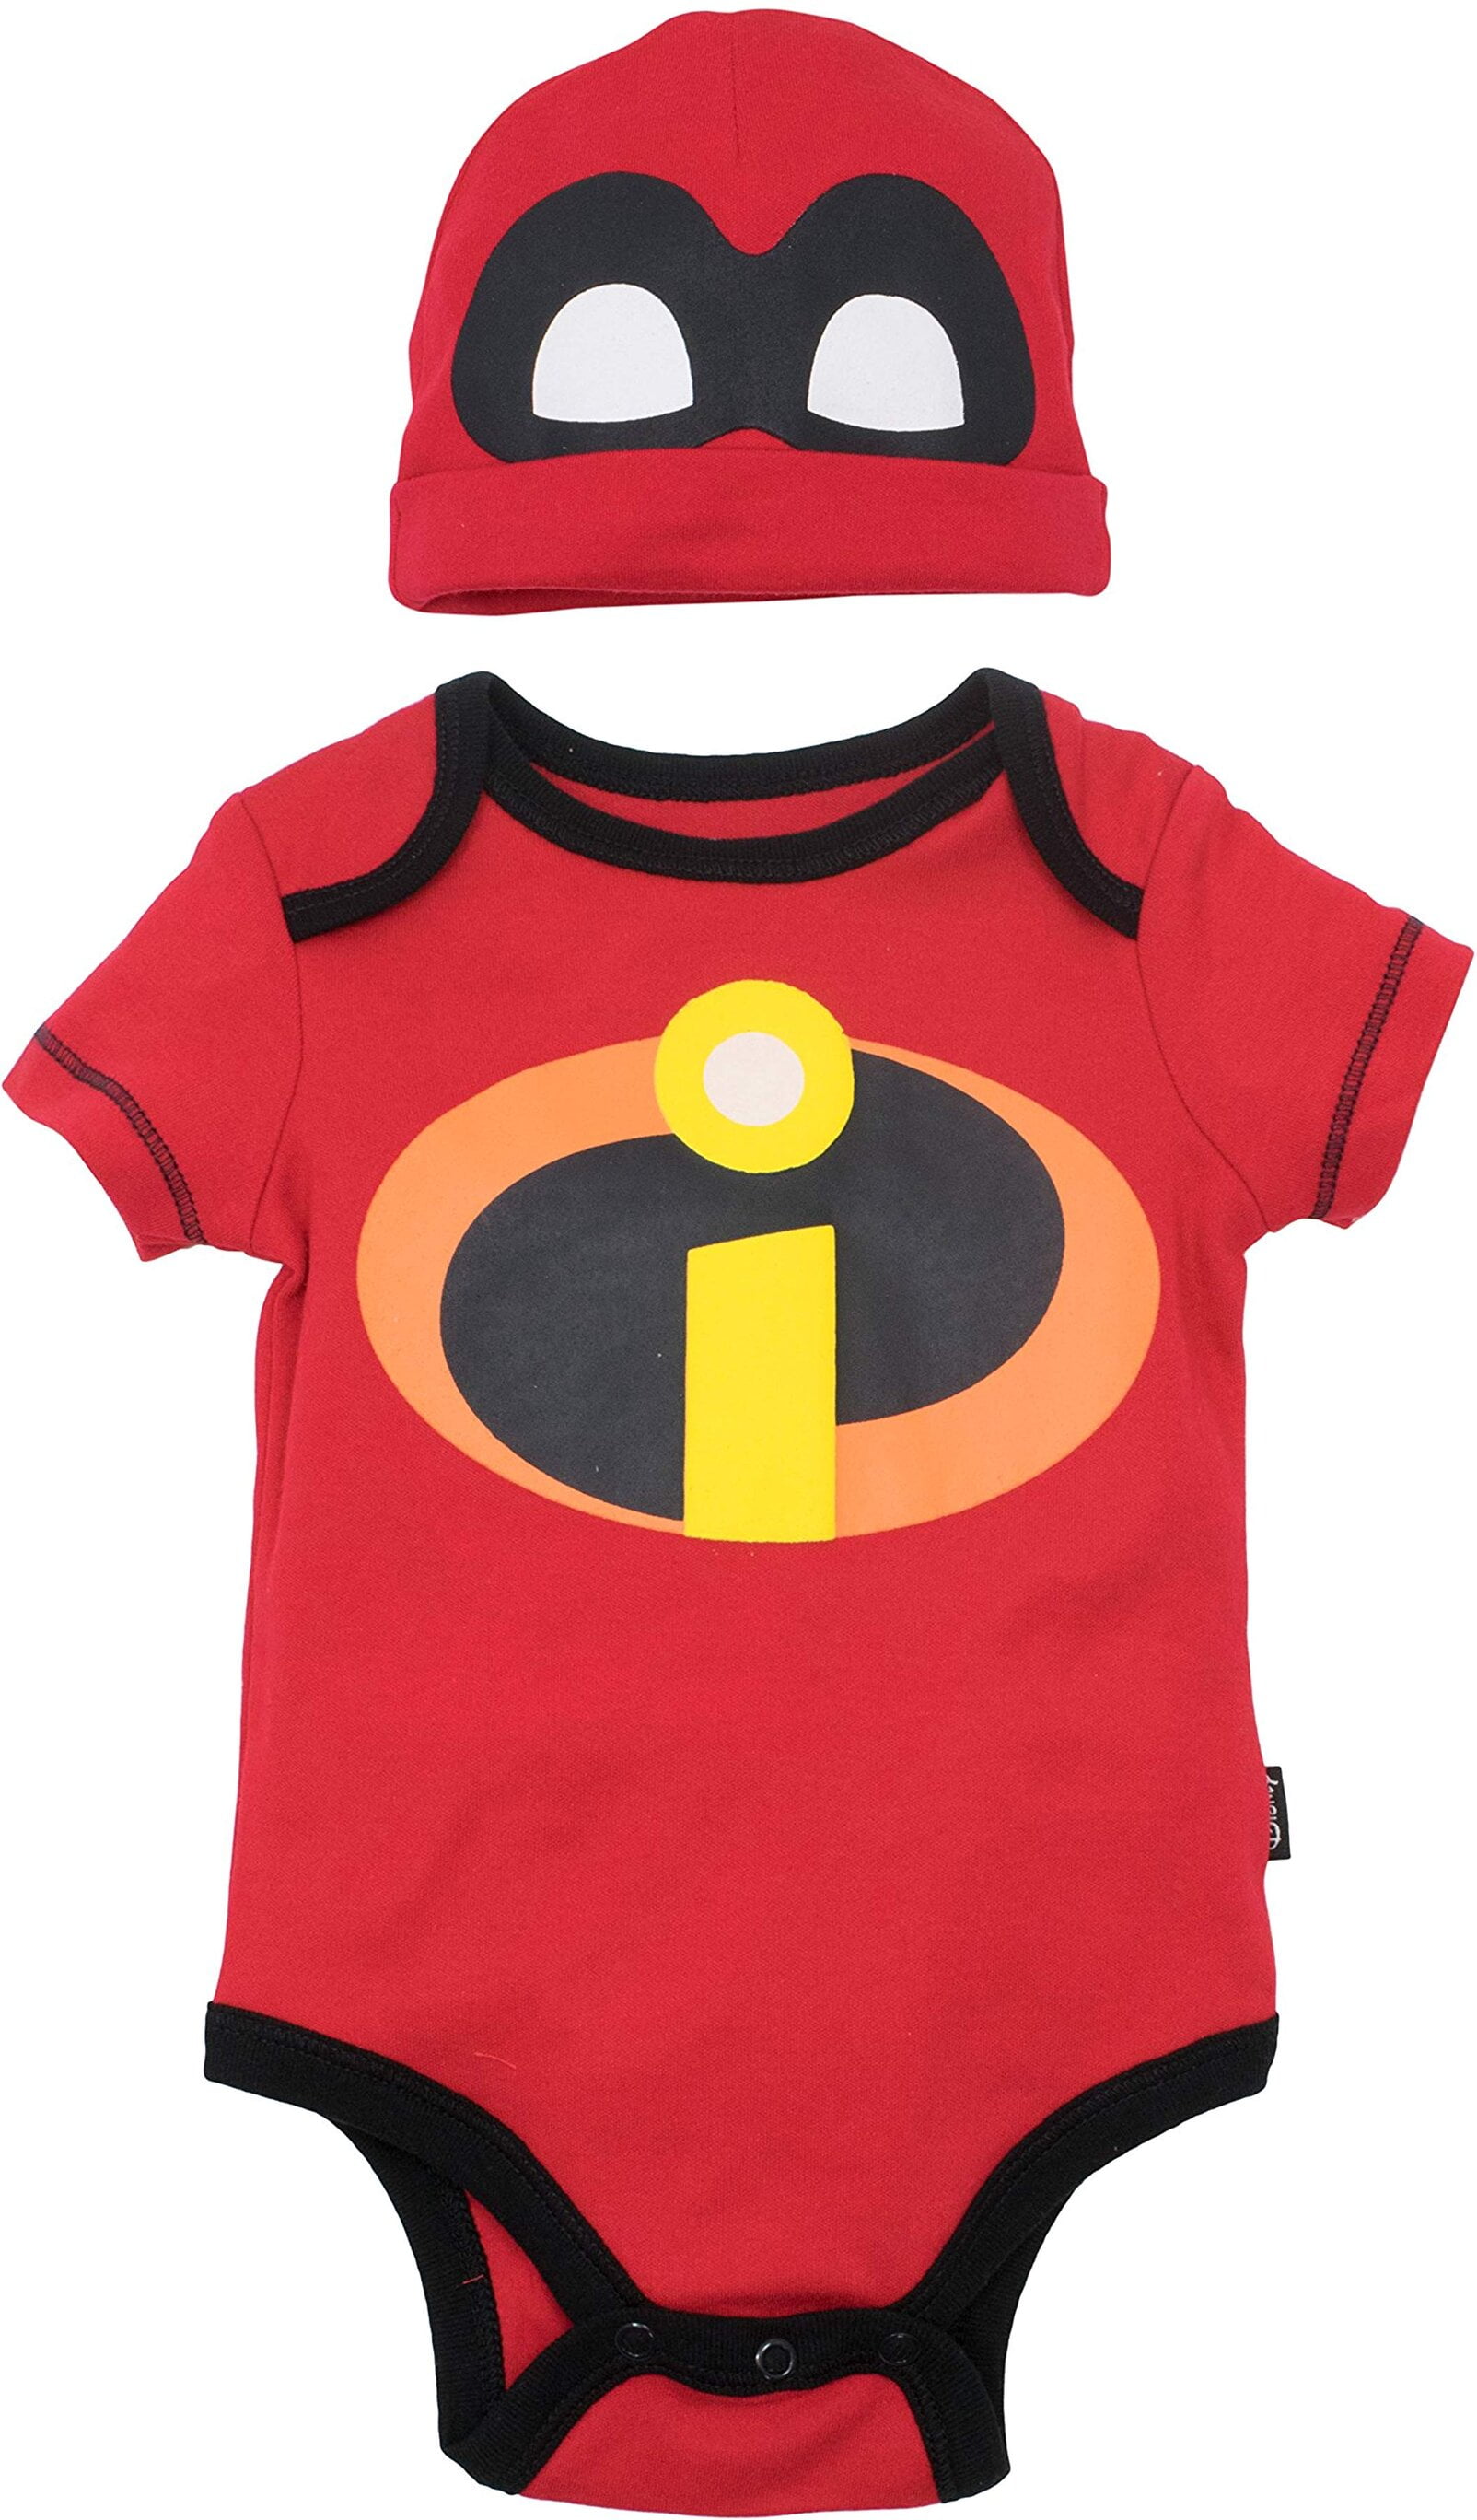 Superhero Costume Boys Pyjamas 100% Cotton Baby Clothes Baby Gifts from Newborn up to 18 Months Footed Sleepsuit for Baby Boy Disney The Incredibles Baby Grows 